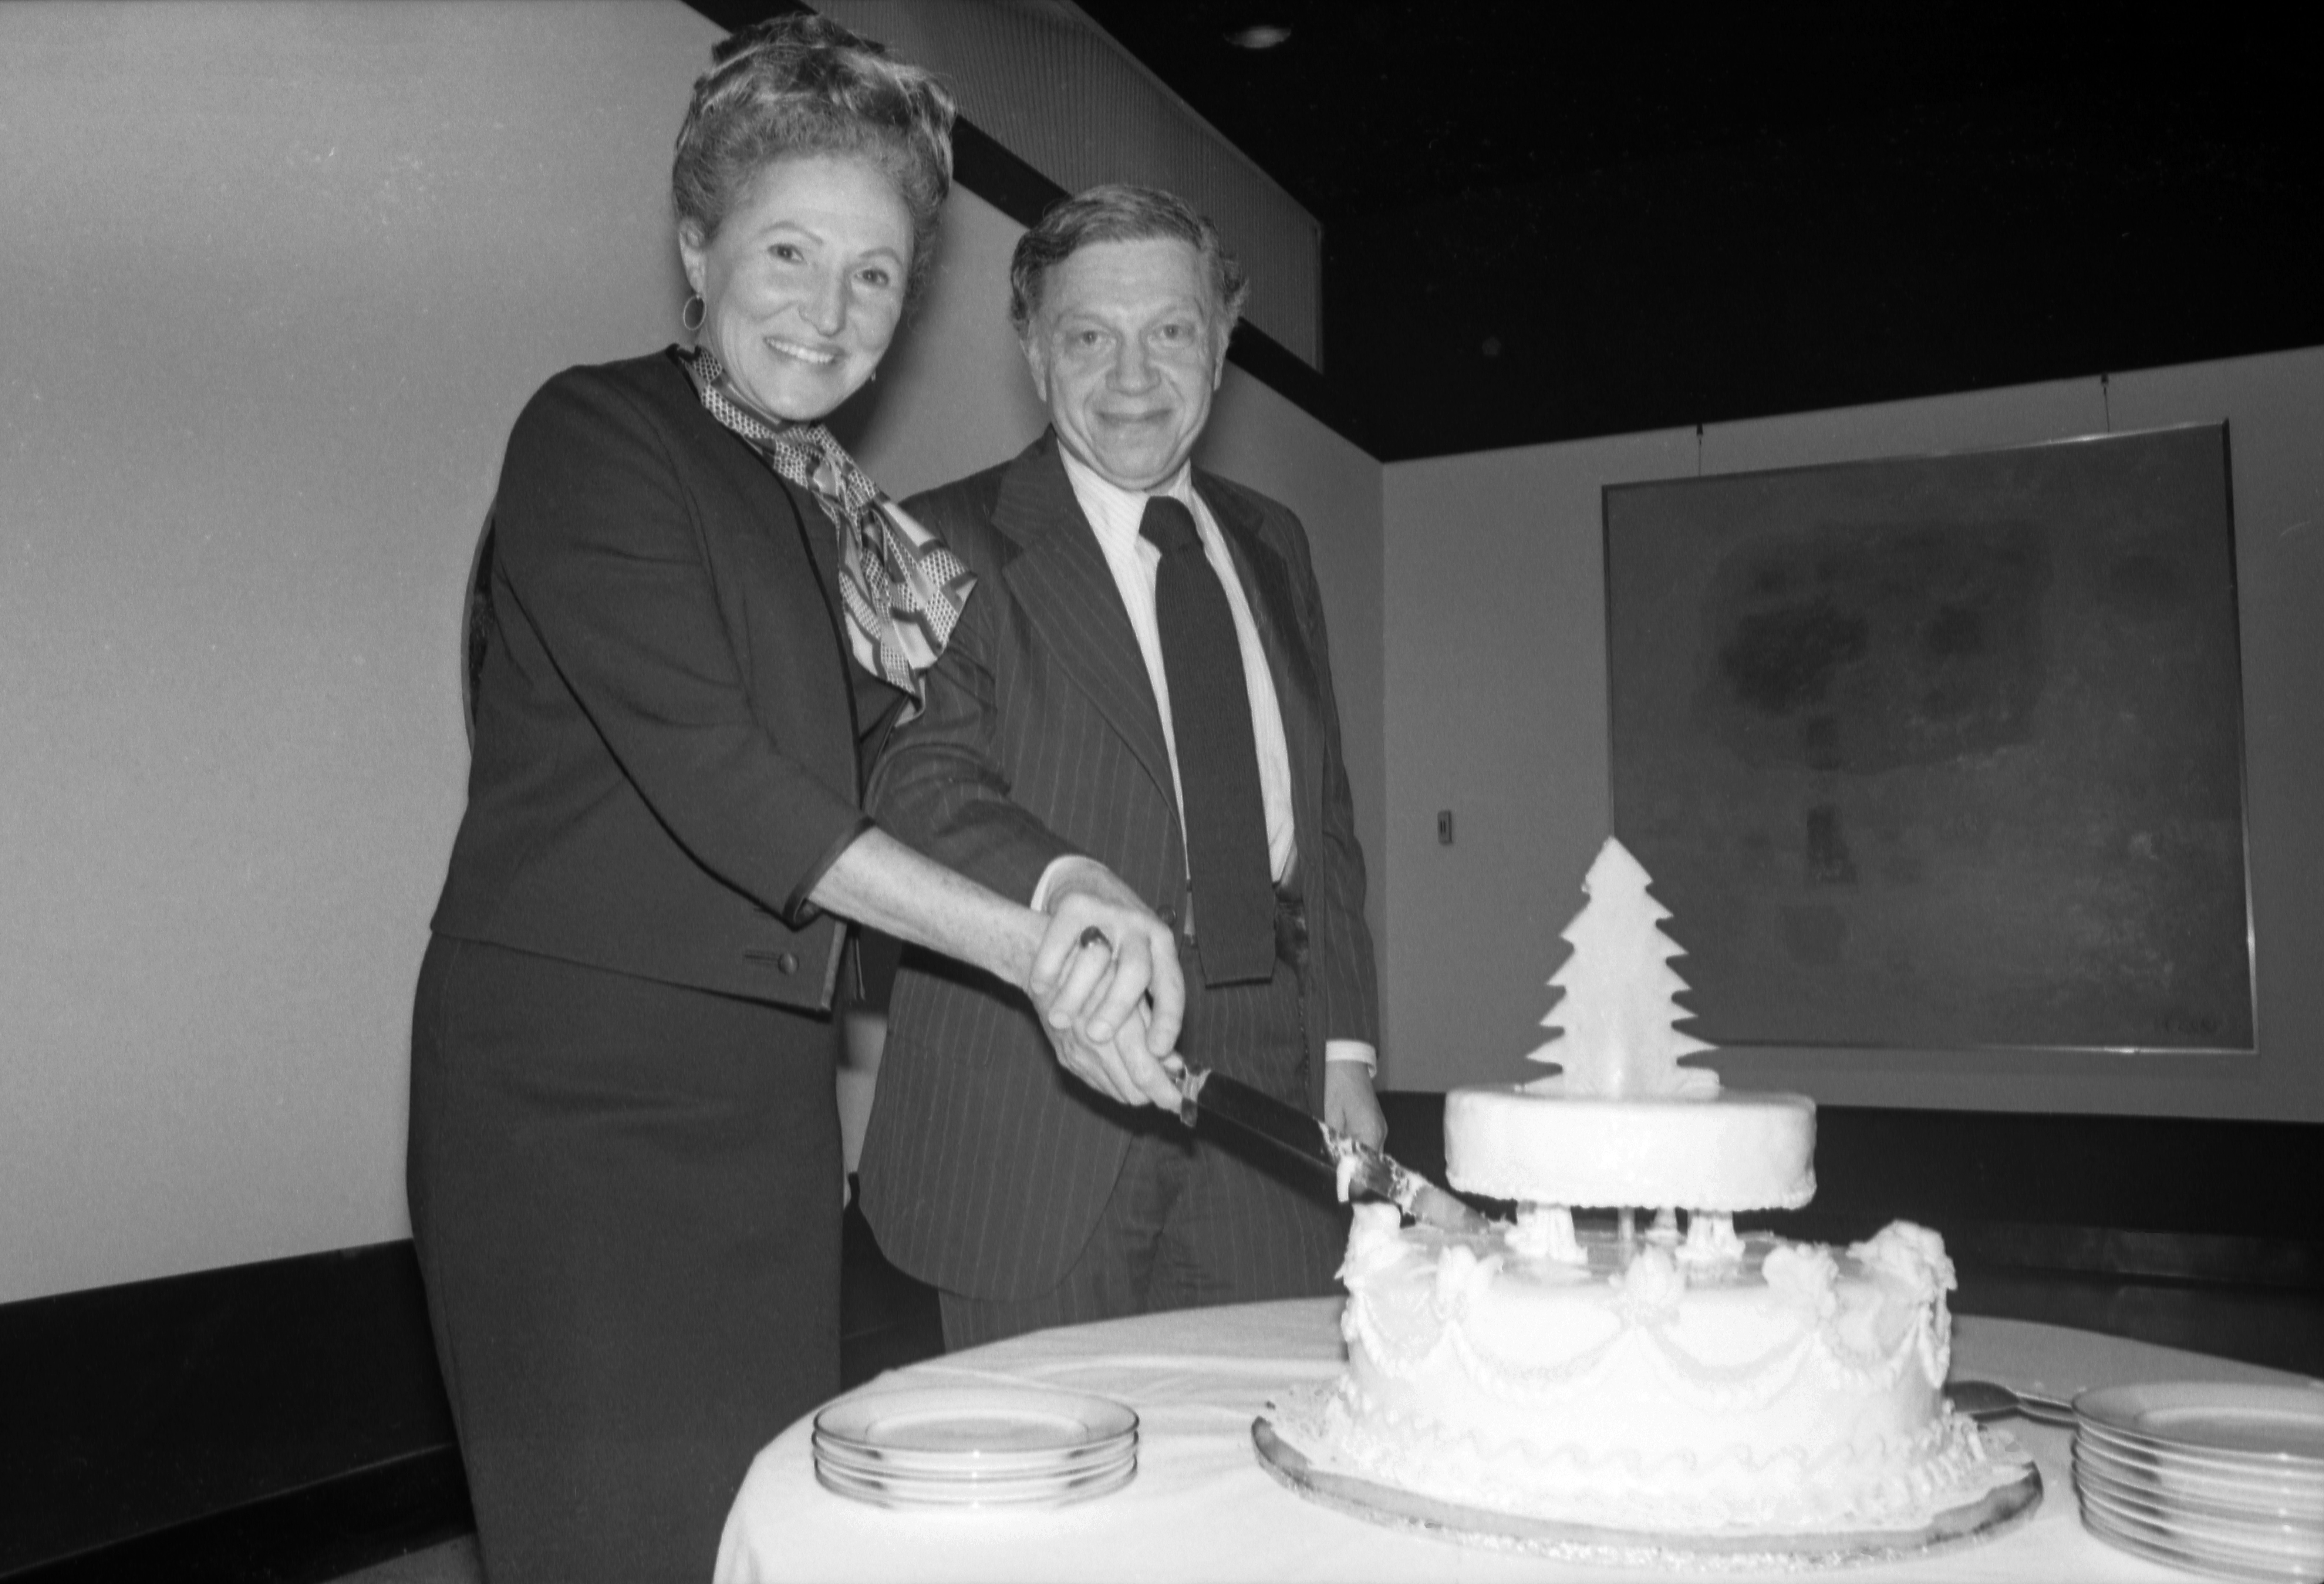 Two persons standing and smiling while cutting a cake.